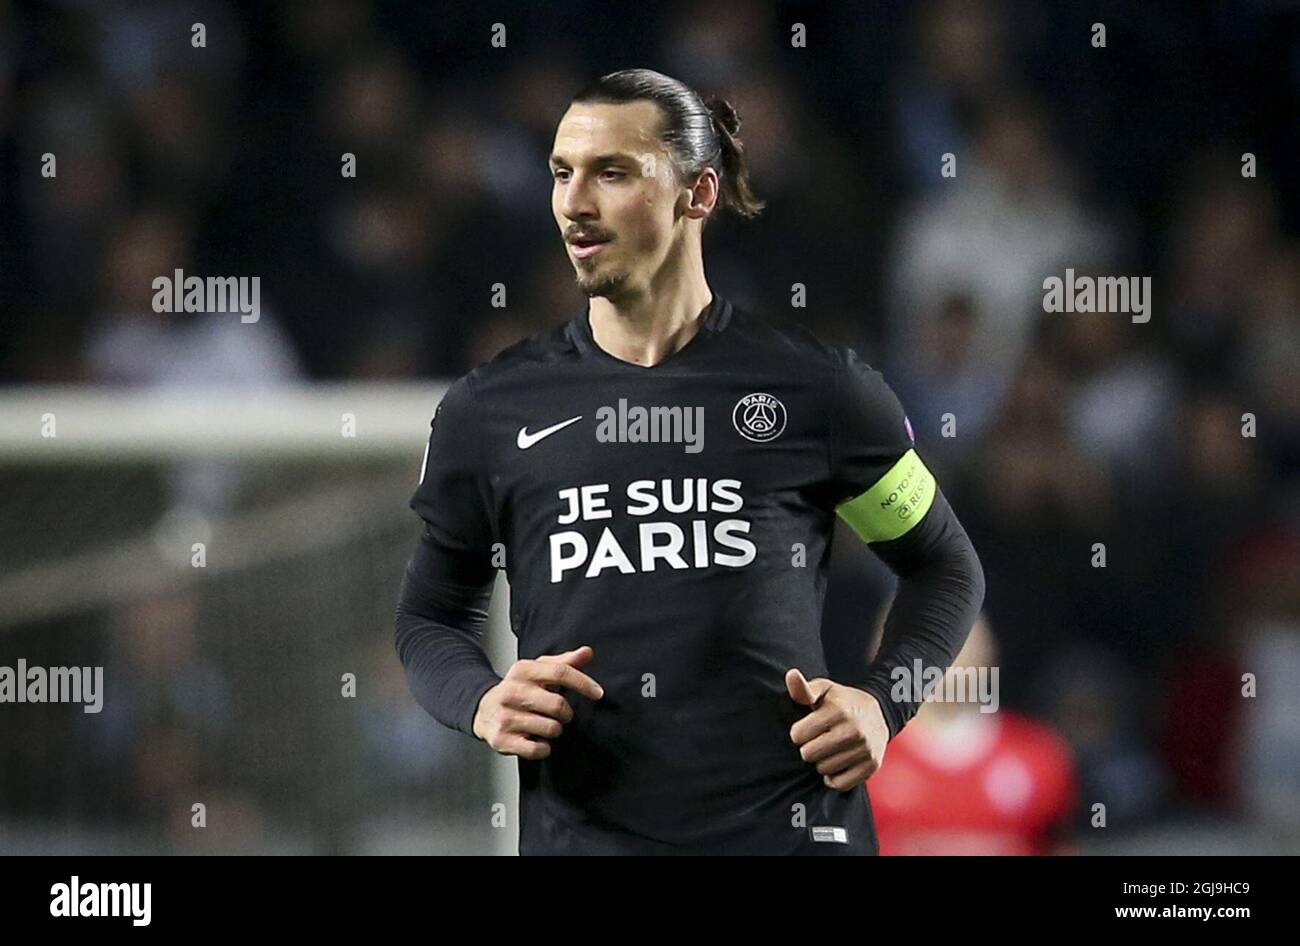 Paris SG's Zlatan Ibrahimovic wearing the Je suis Paris jersey during the  Champions League Group A soccer match between Malmo FF and Paris  Saint-Germain FC at Malmo New Stadium in Malmo, Sweden,